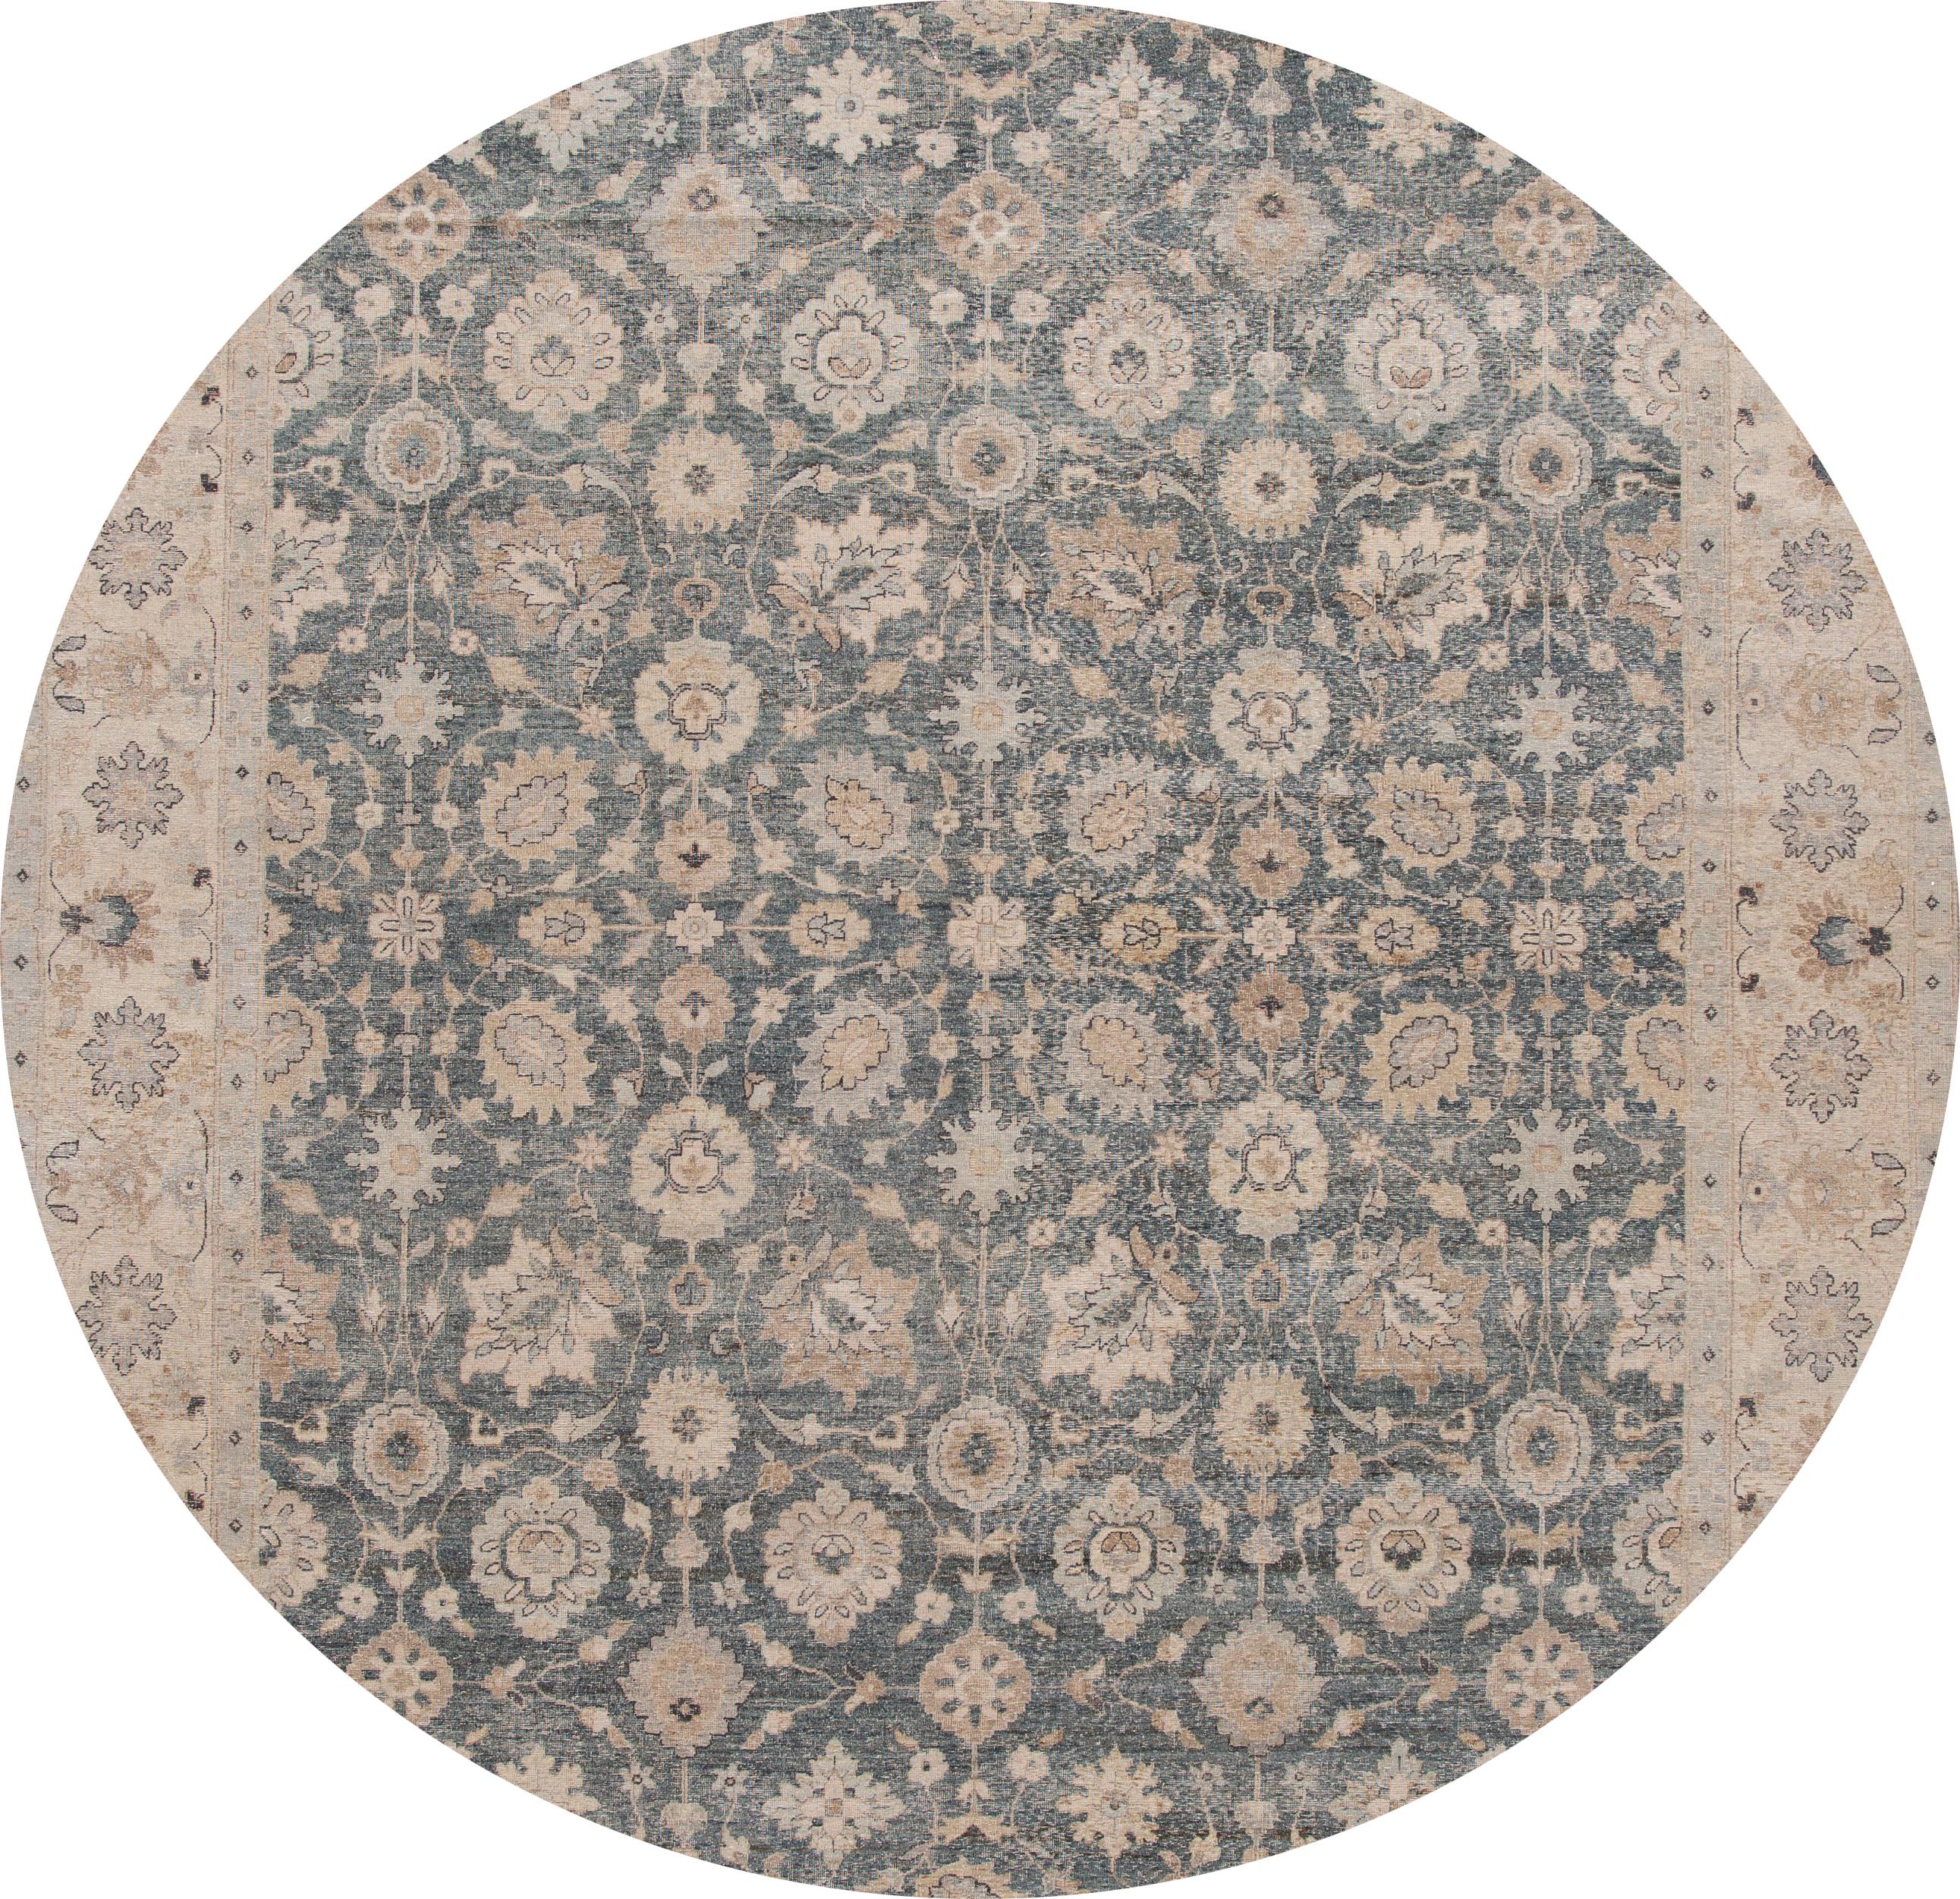 A contemporary Tabriz-style rug with an ivory field and blue accents in a symmetrical, interconnected floral and vine design. This hand knotted wool.
This rug measures 9'11” x 13'10”.